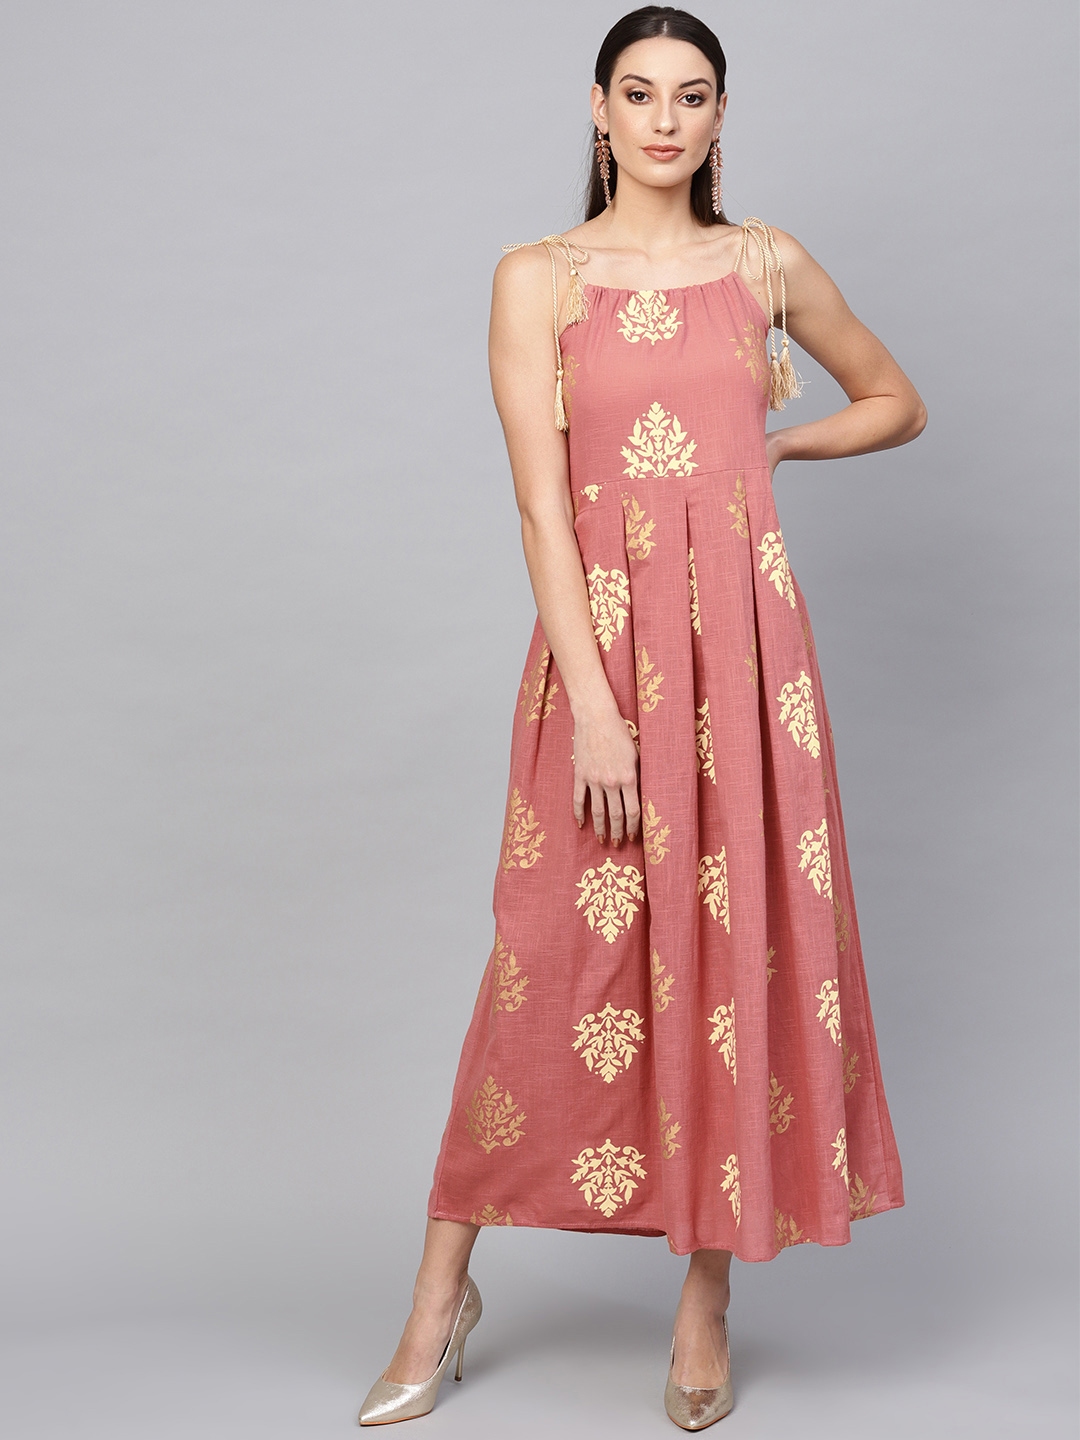 Buy Aks Women Pink And Golden Printed Maxi Dress Dresses For Women